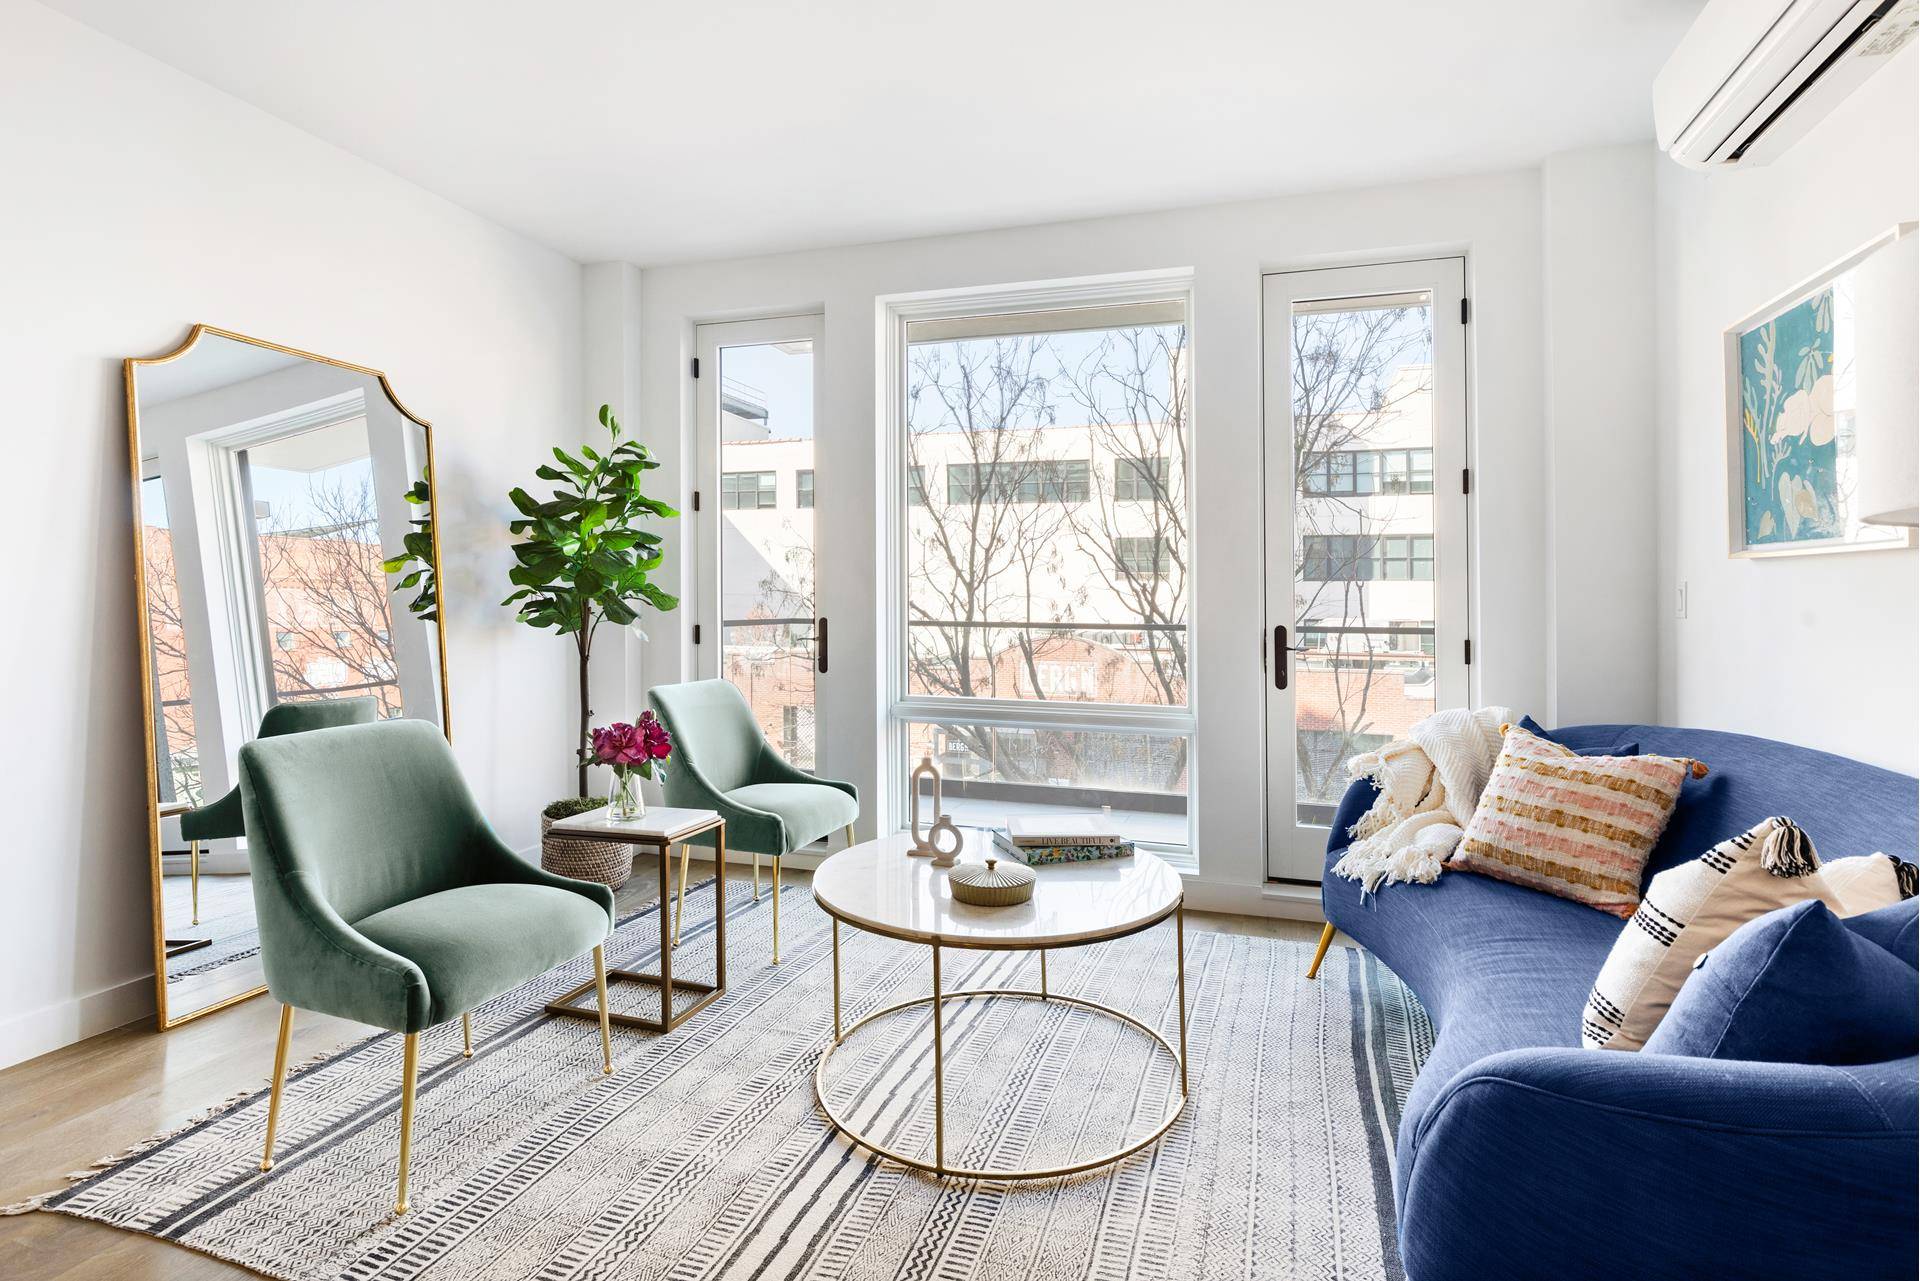 ALL OPEN HOUSES ARE BY APPOINTMENT ONLY906 Bergen is a newly constructed, 18 unit boutique condominium located at the crossroads of Crown Heights and Prospect Heights, Brooklyn.